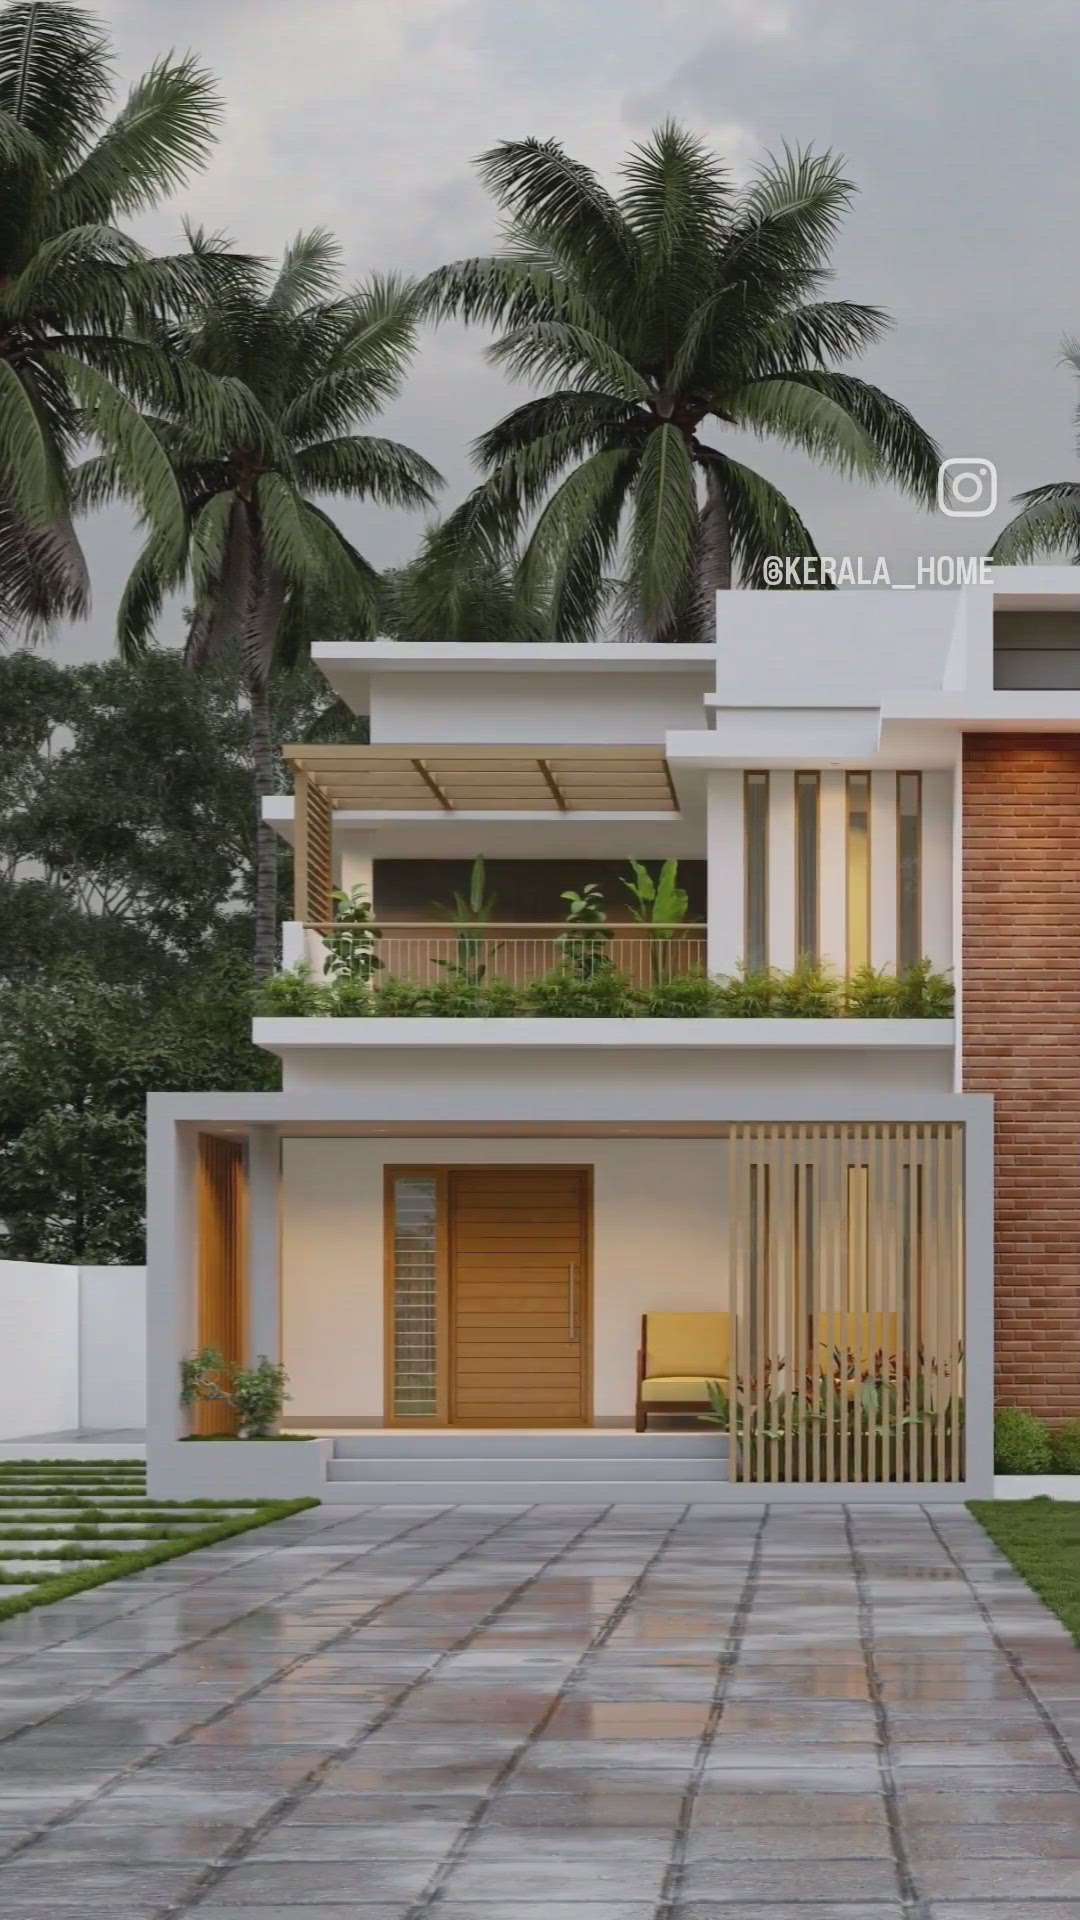 Proposed Residential Design 🤩✨🏡

Client : Manu
Place : Alappuzha

Area : 1950 sqr ft 
Specfn : 4 bhk